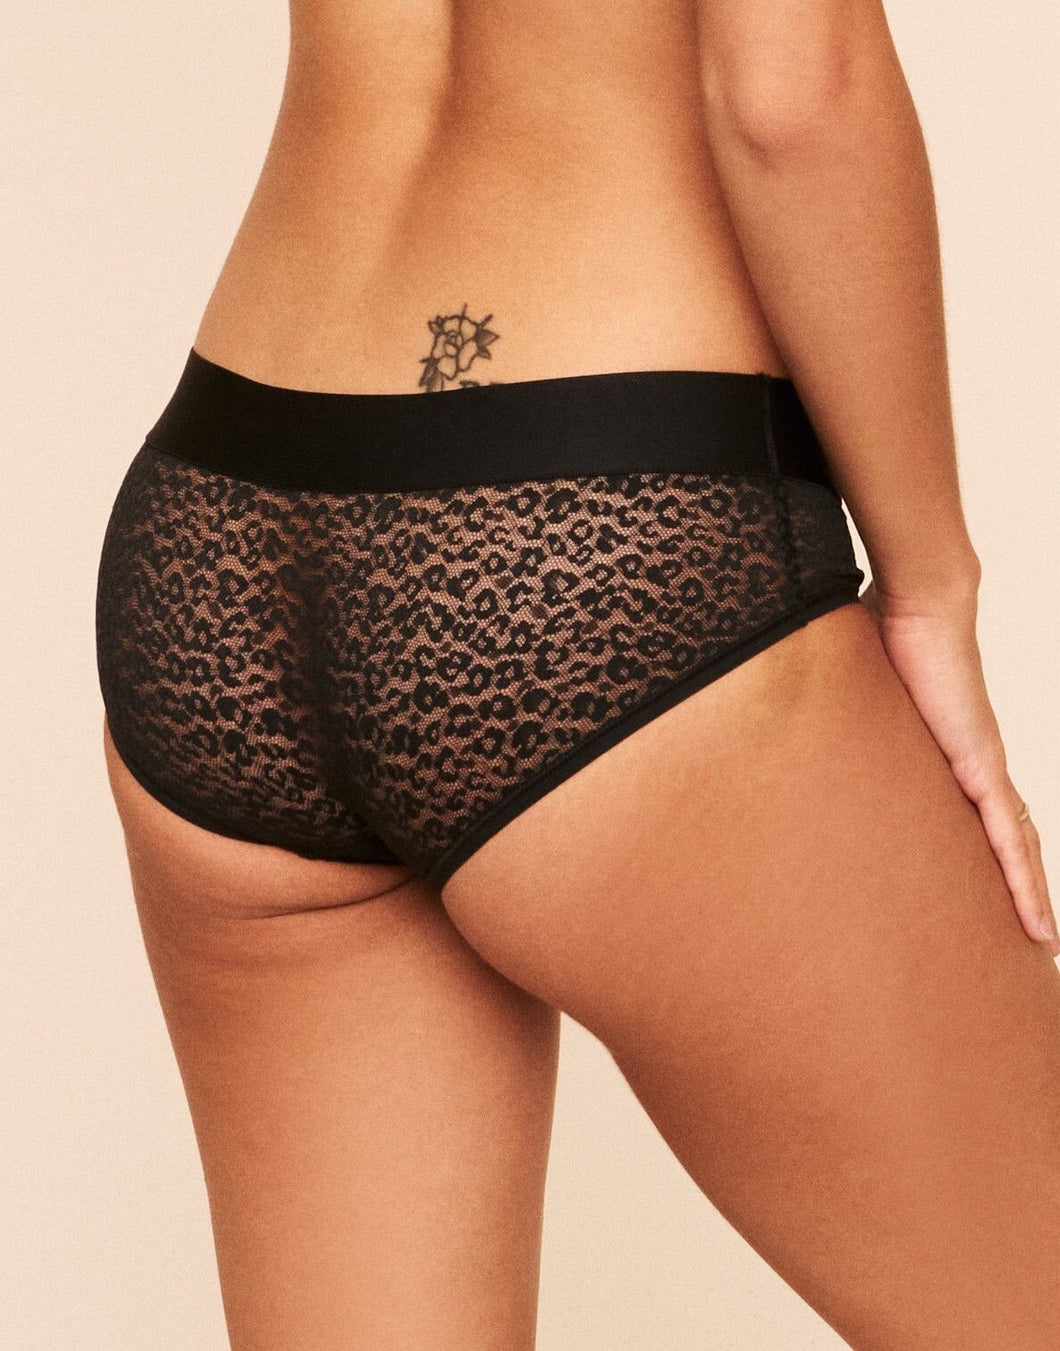 Earth Republic James Lace Lace Hipster in color Jet Black and shape hipster